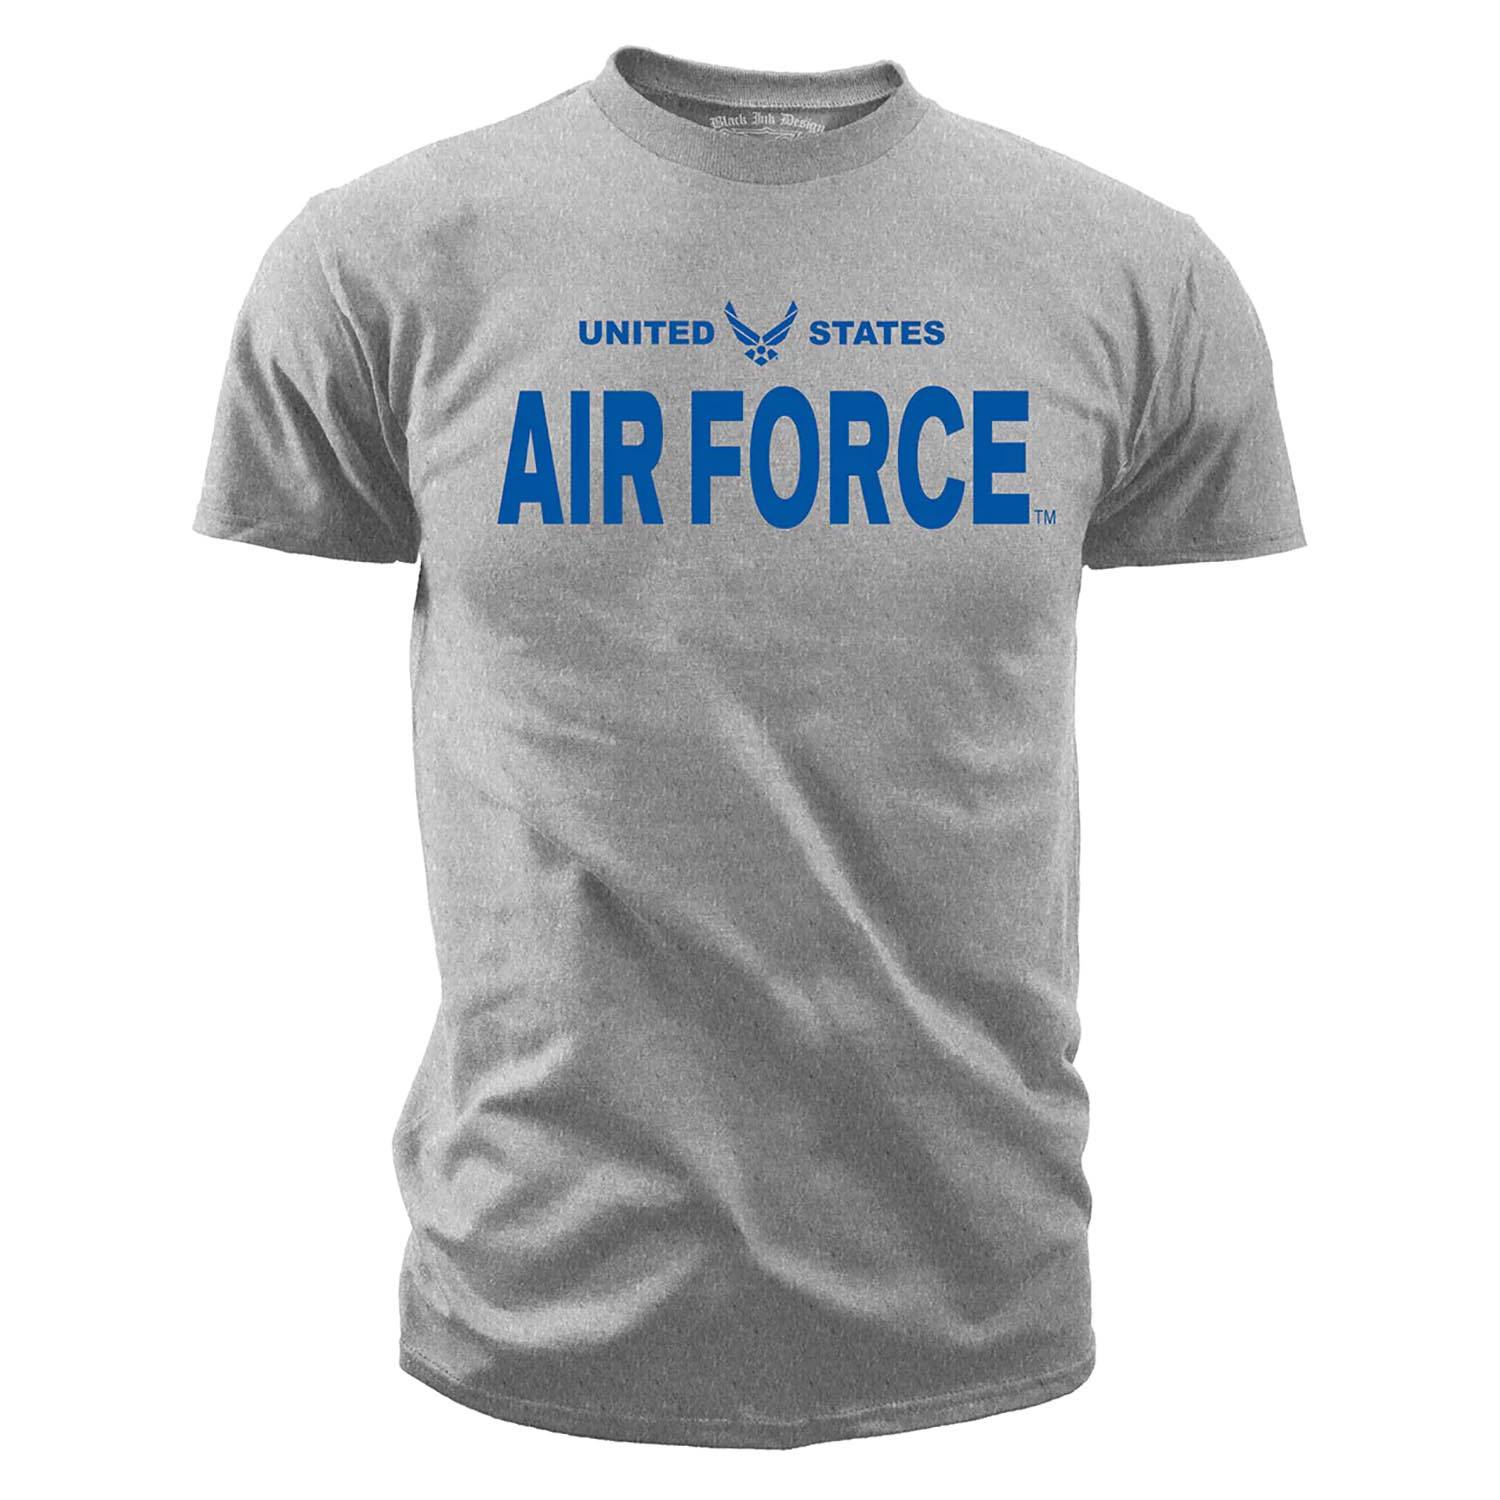 7.62 Design United States Air Force T-Shirt